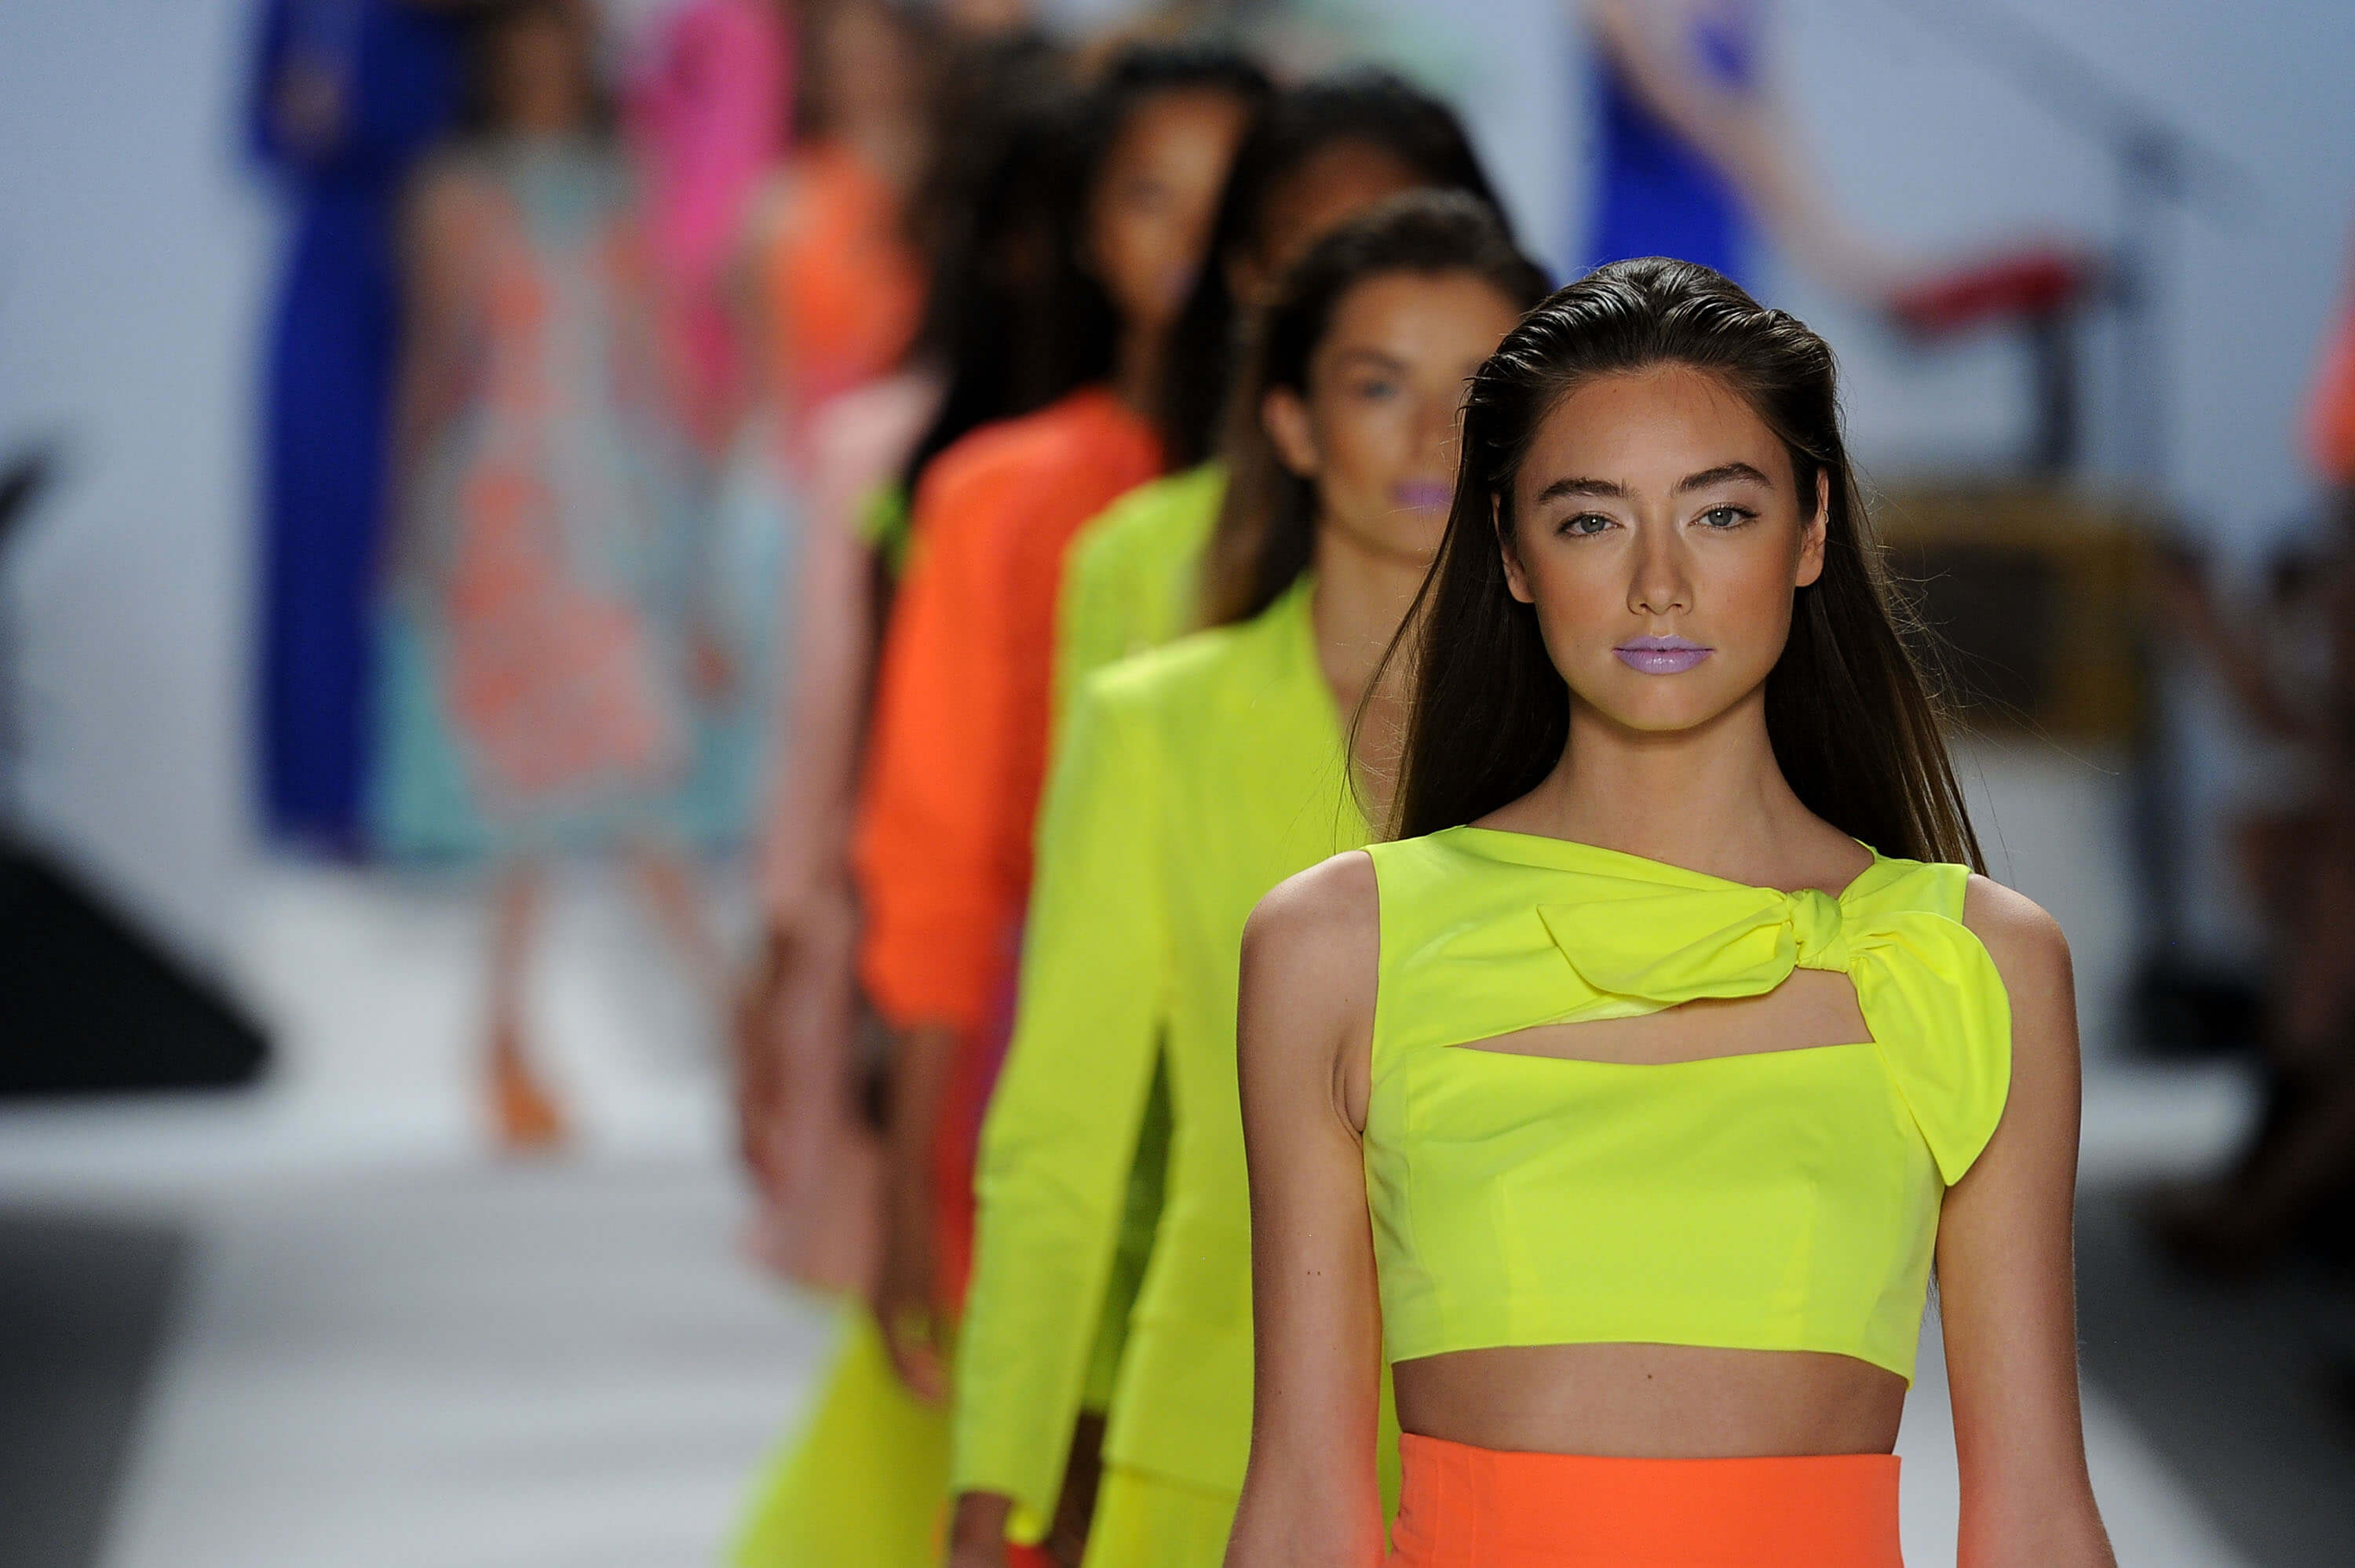 The Do’s and Don’ts of Runway Modelling